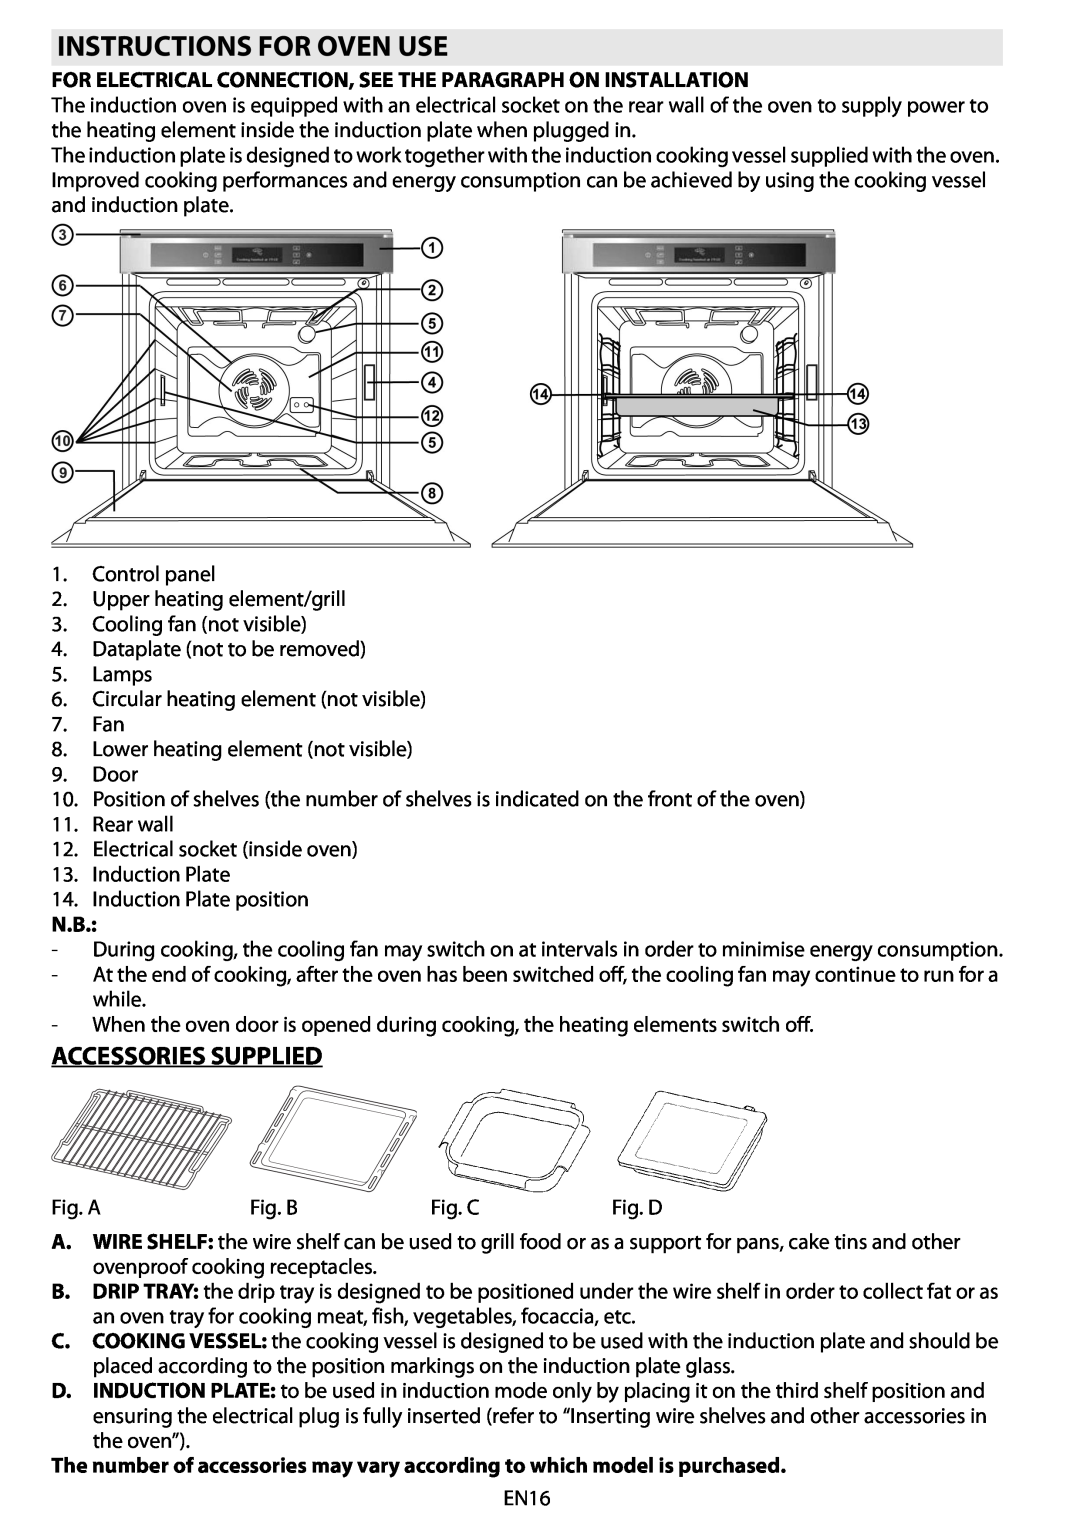 Whirlpool 8910 manual do utilizador Instructions For Oven Use, Accessories Supplied 